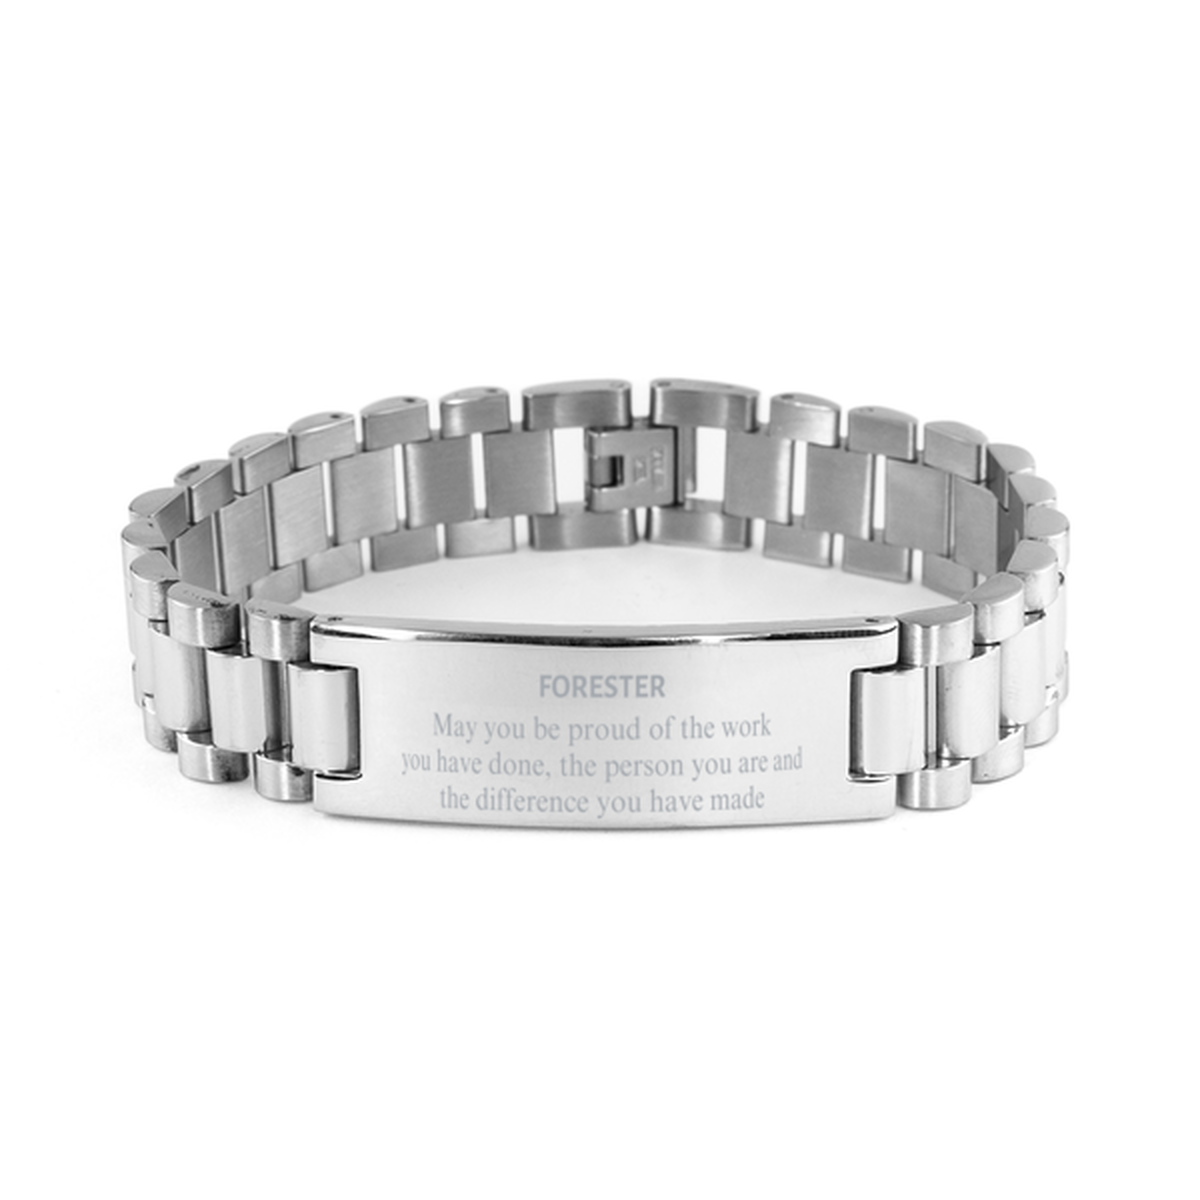 Forester May you be proud of the work you have done, Retirement Forester Ladder Stainless Steel Bracelet for Colleague Appreciation Gifts Amazing for Forester